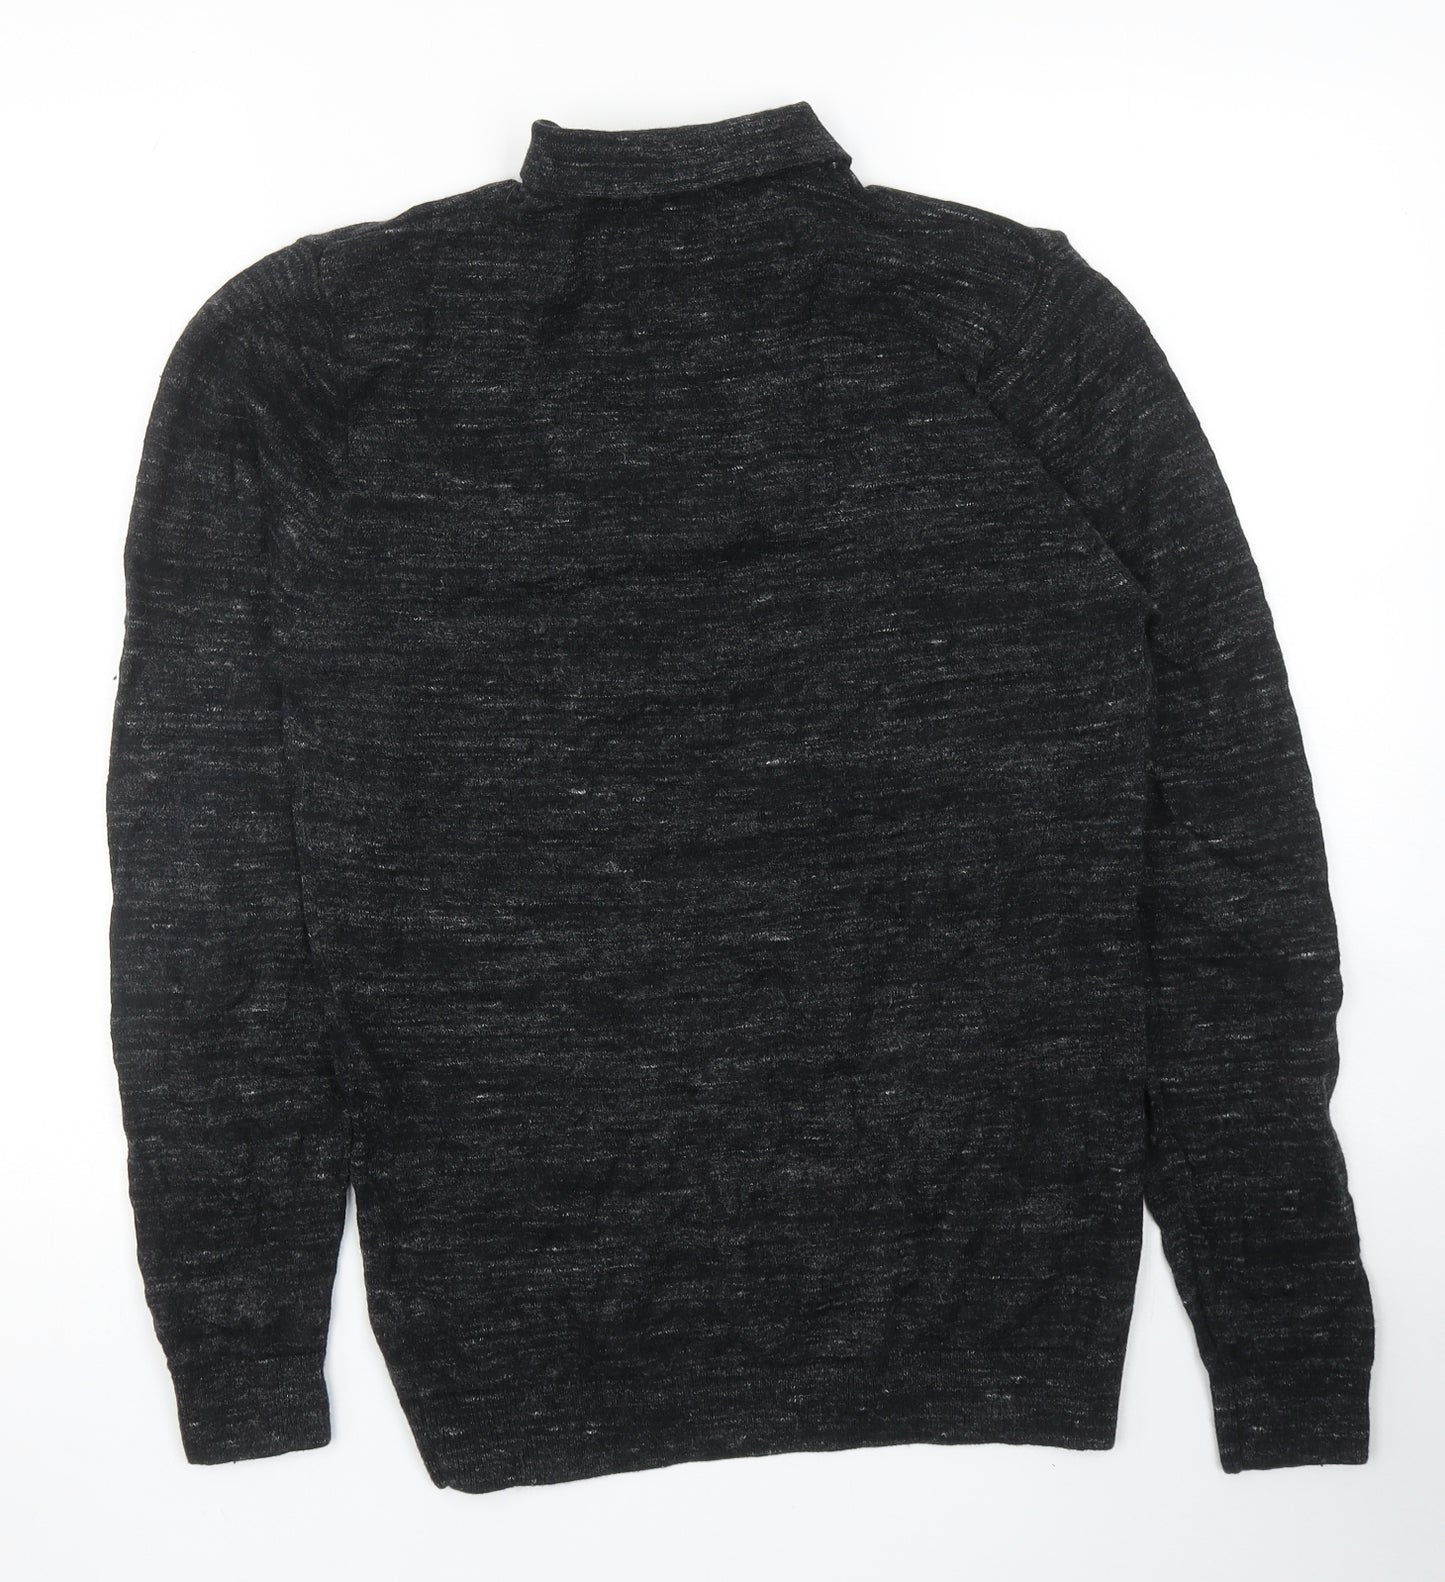 NEXT Mens Black Collared Cotton Pullover Jumper Size M Long Sleeve - Polo